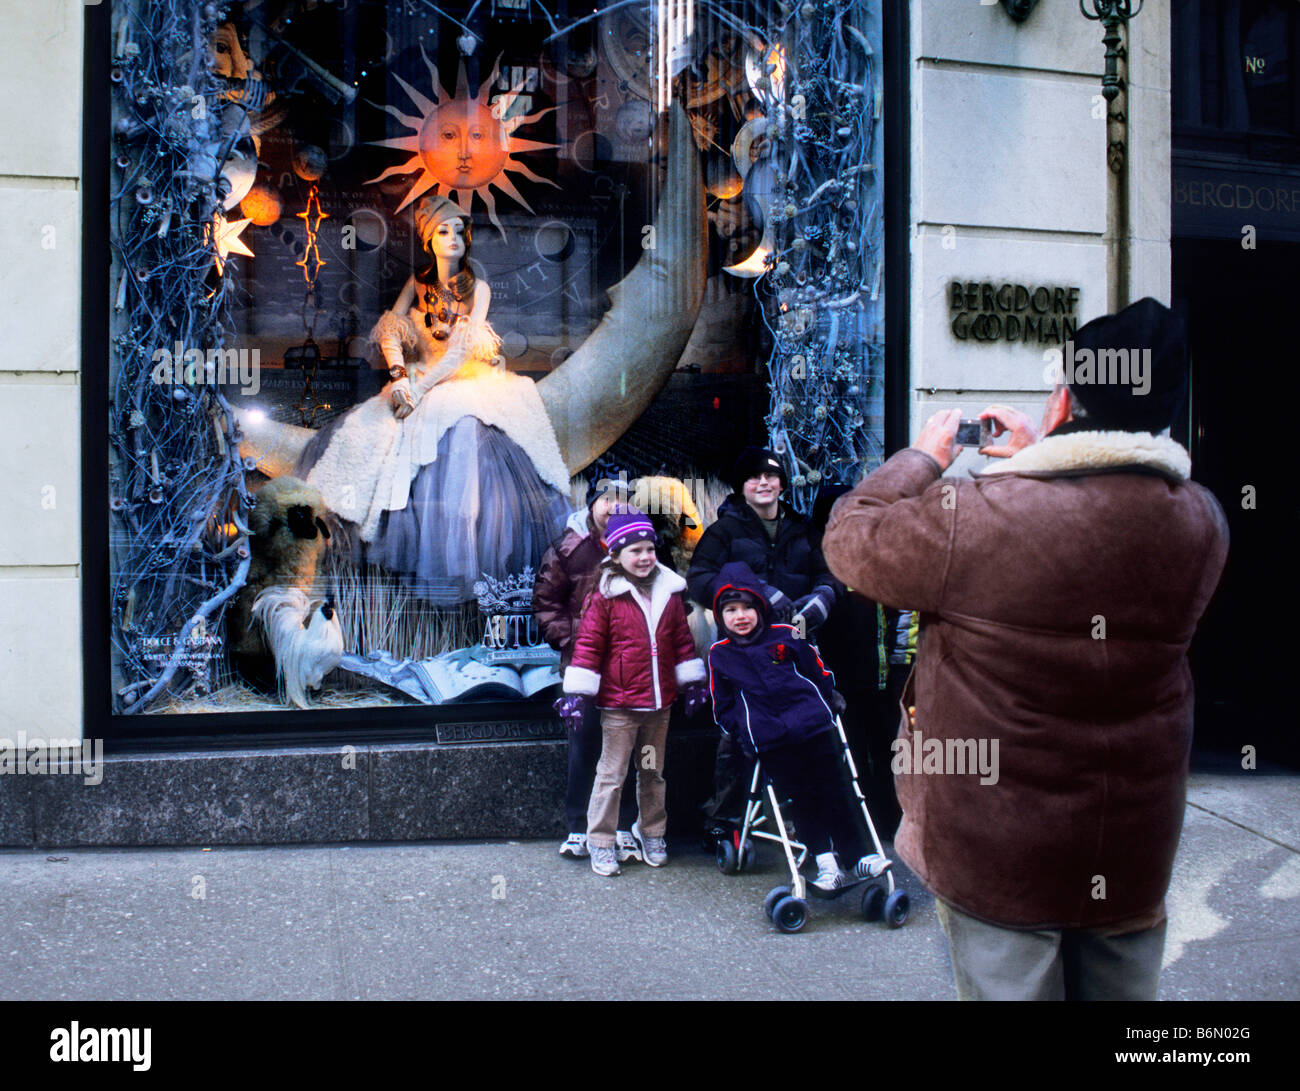 Louis Vuitton in the Window of Bergdorf Goodman, 5th Ave